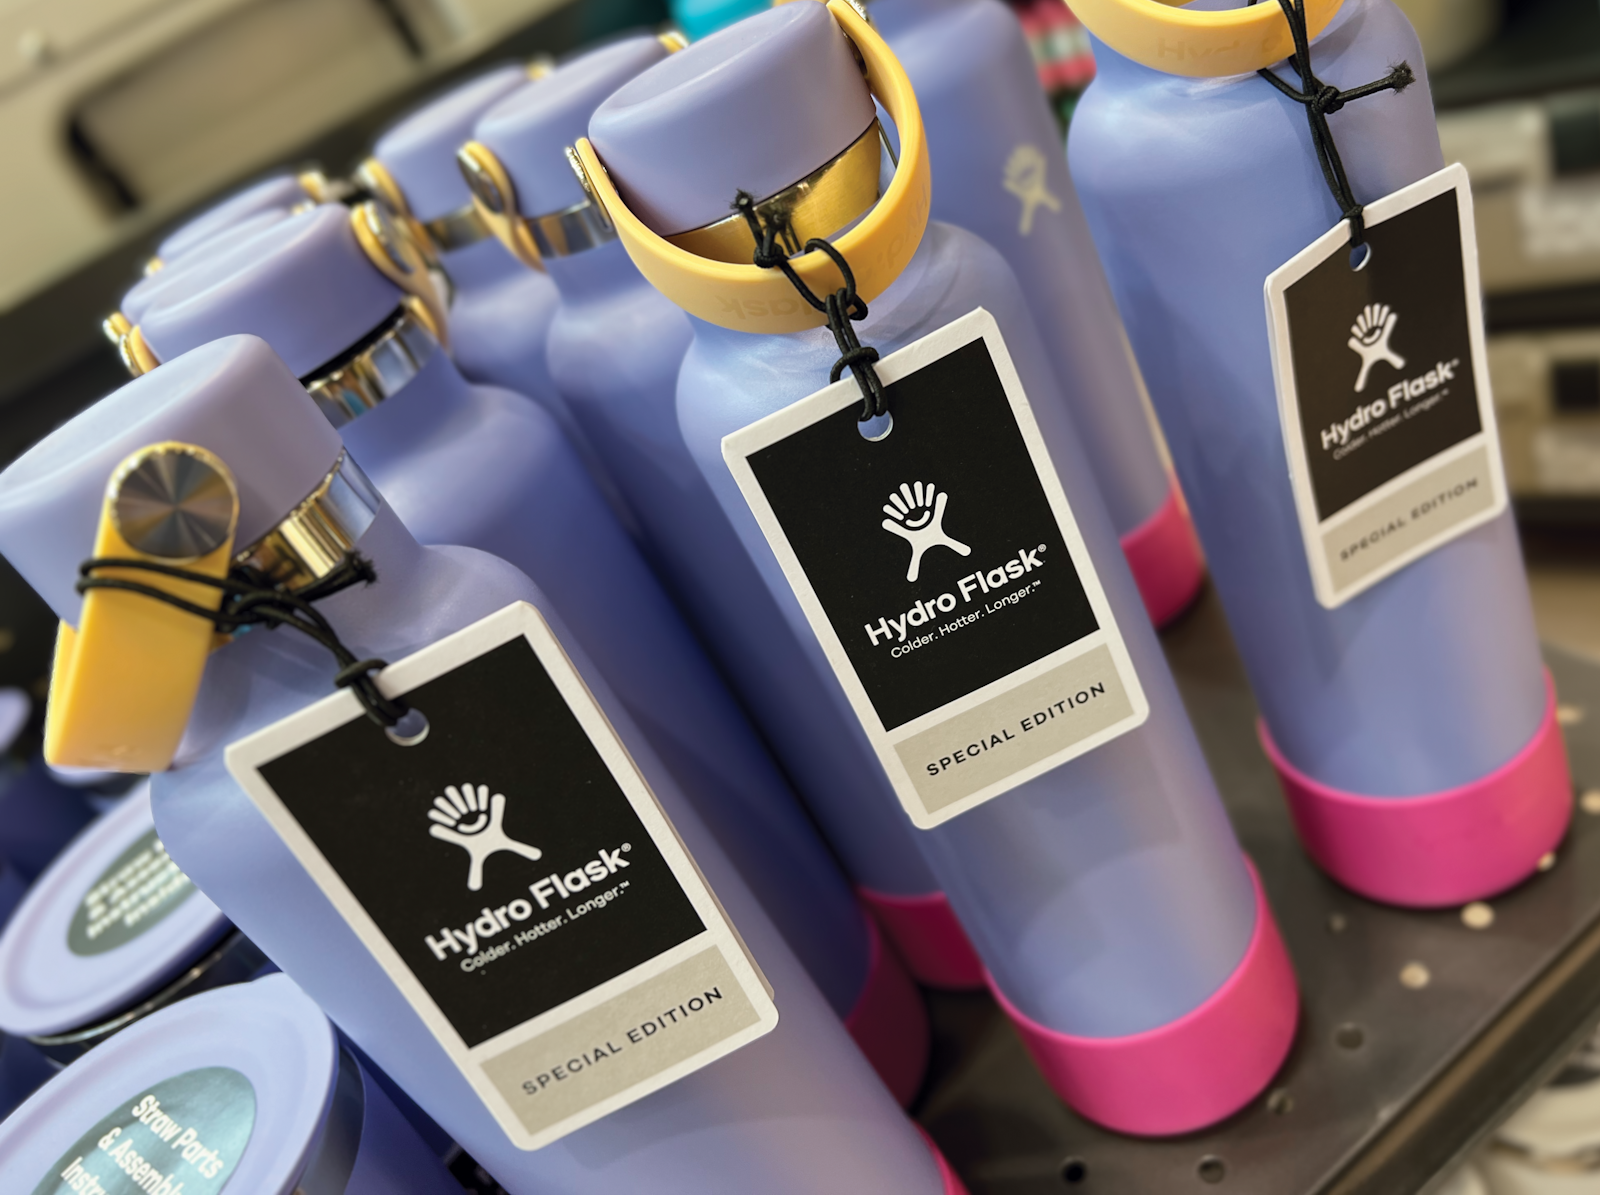 The Hydro Flask brand design hang tag on bottles in retail display.